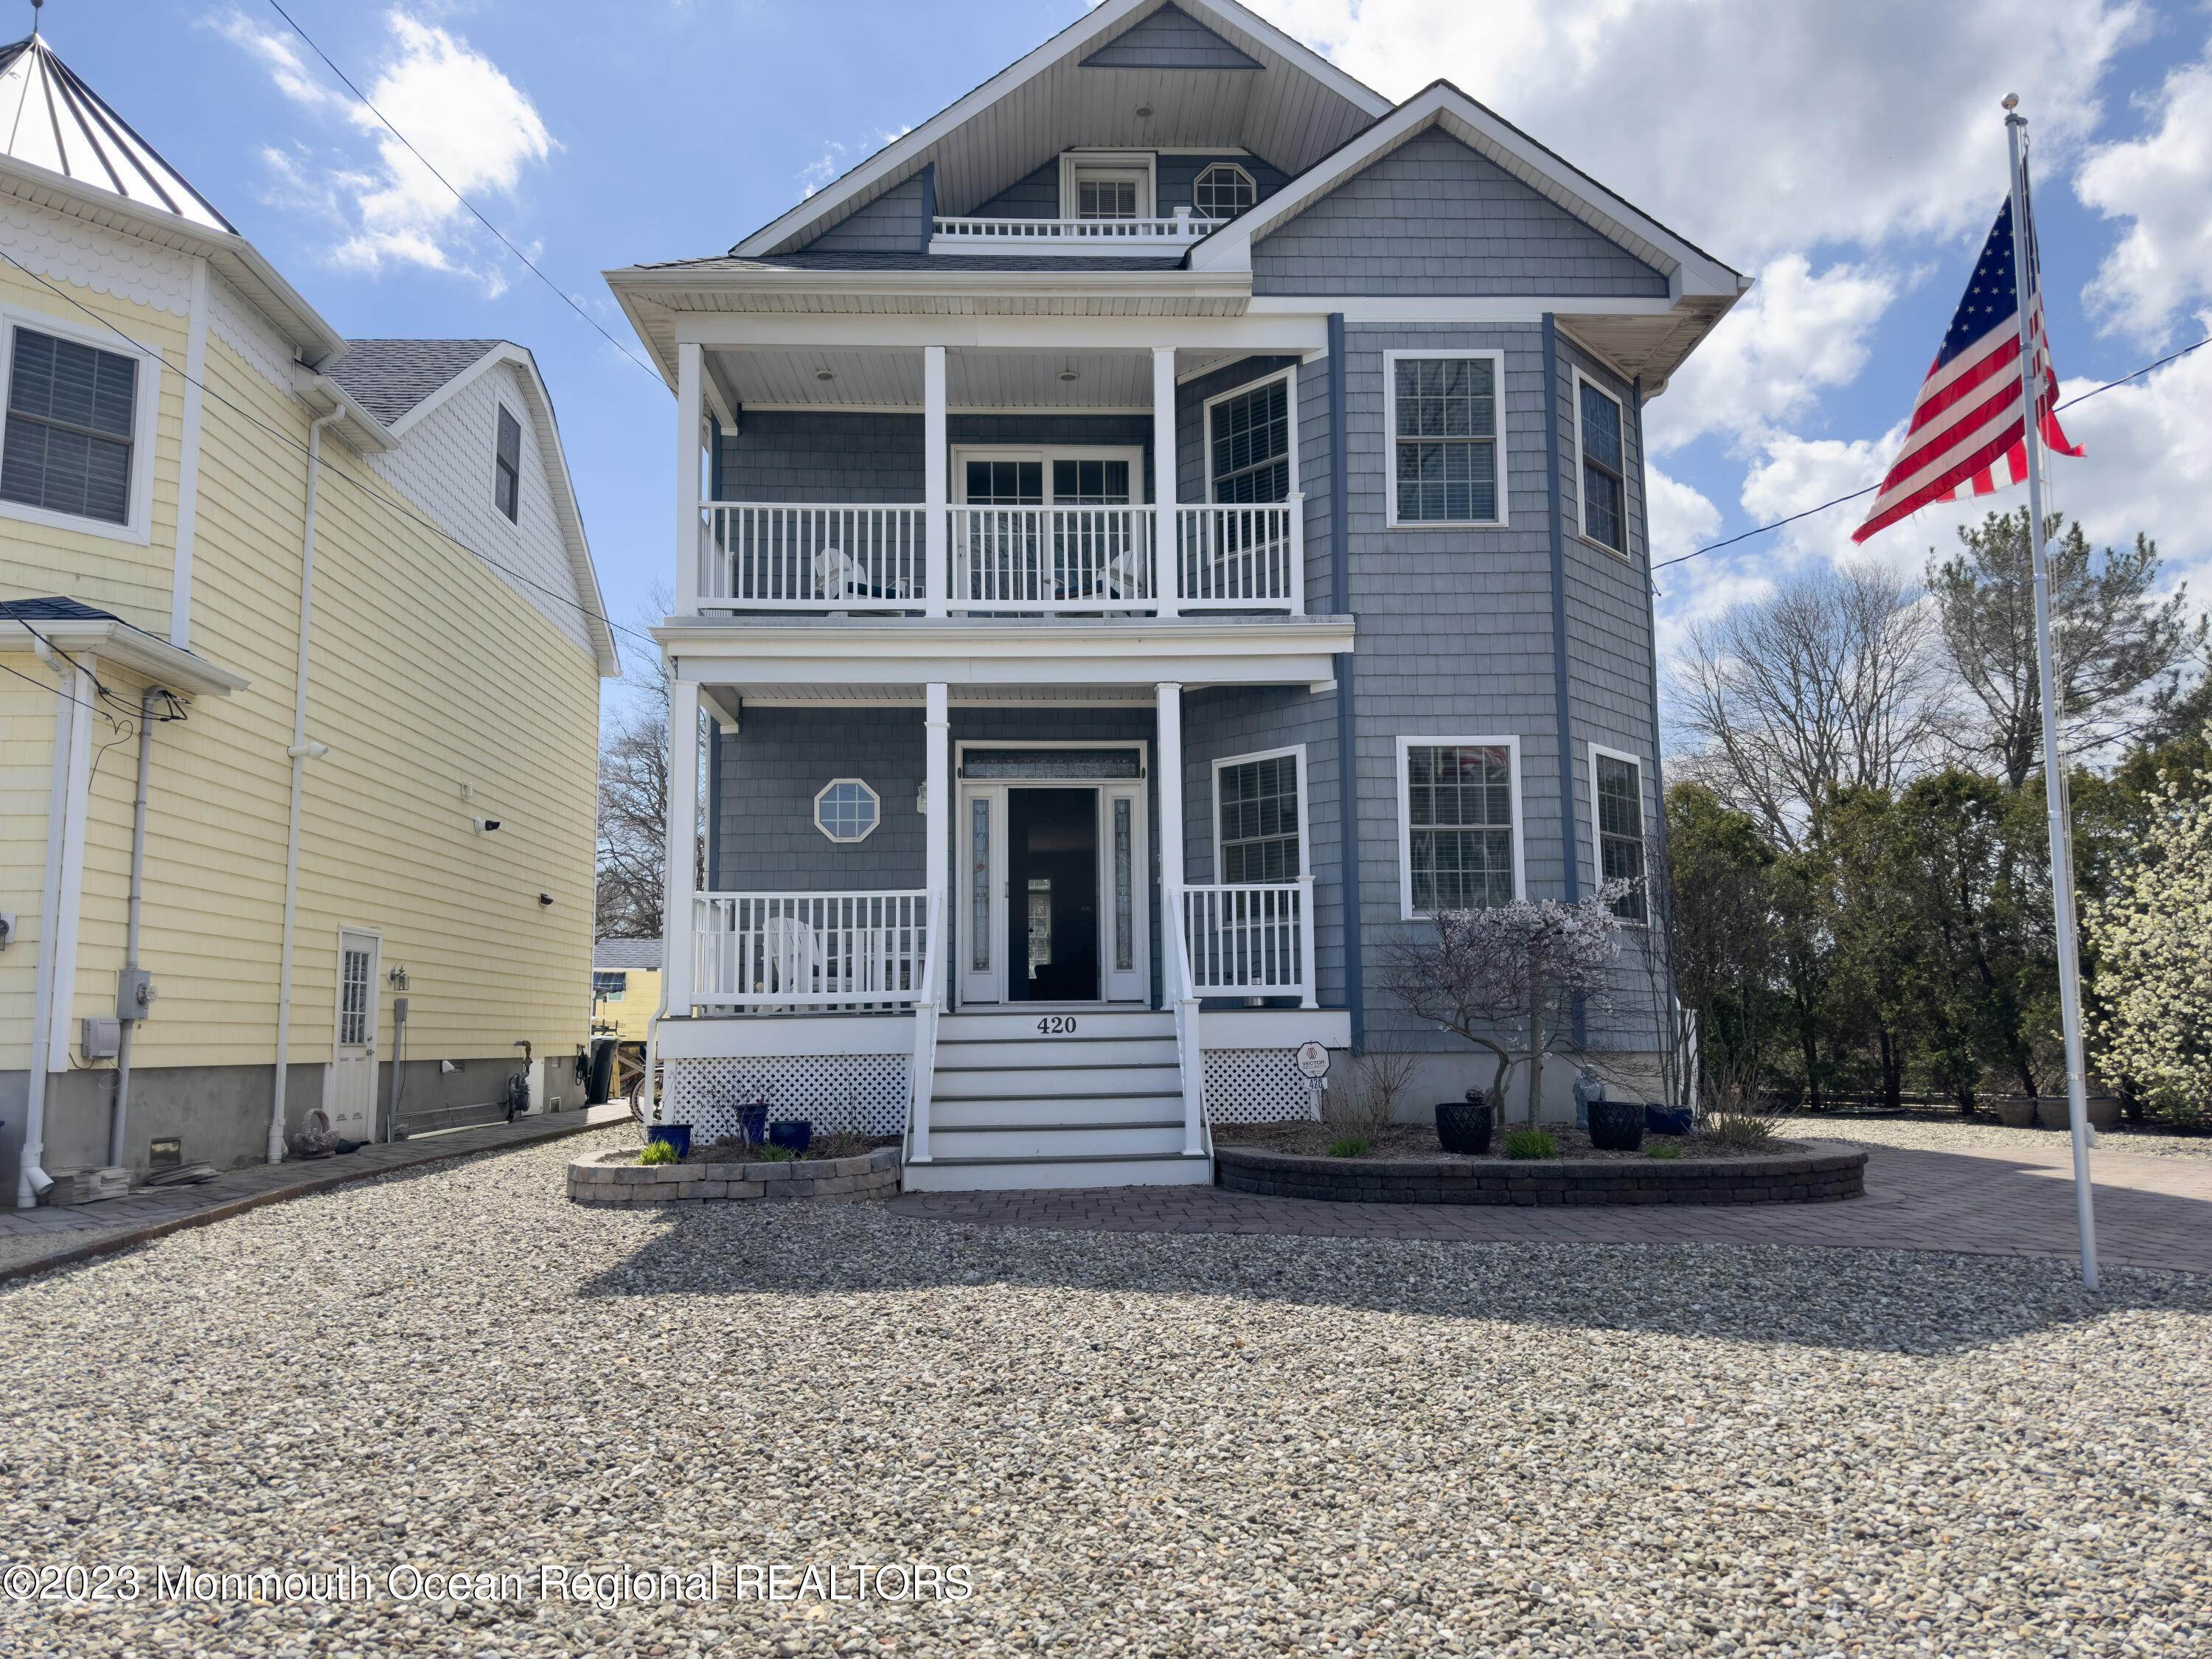 Property for Sale at 420 Carter Avenue Point Pleasant Beach, New Jersey 08742 United States